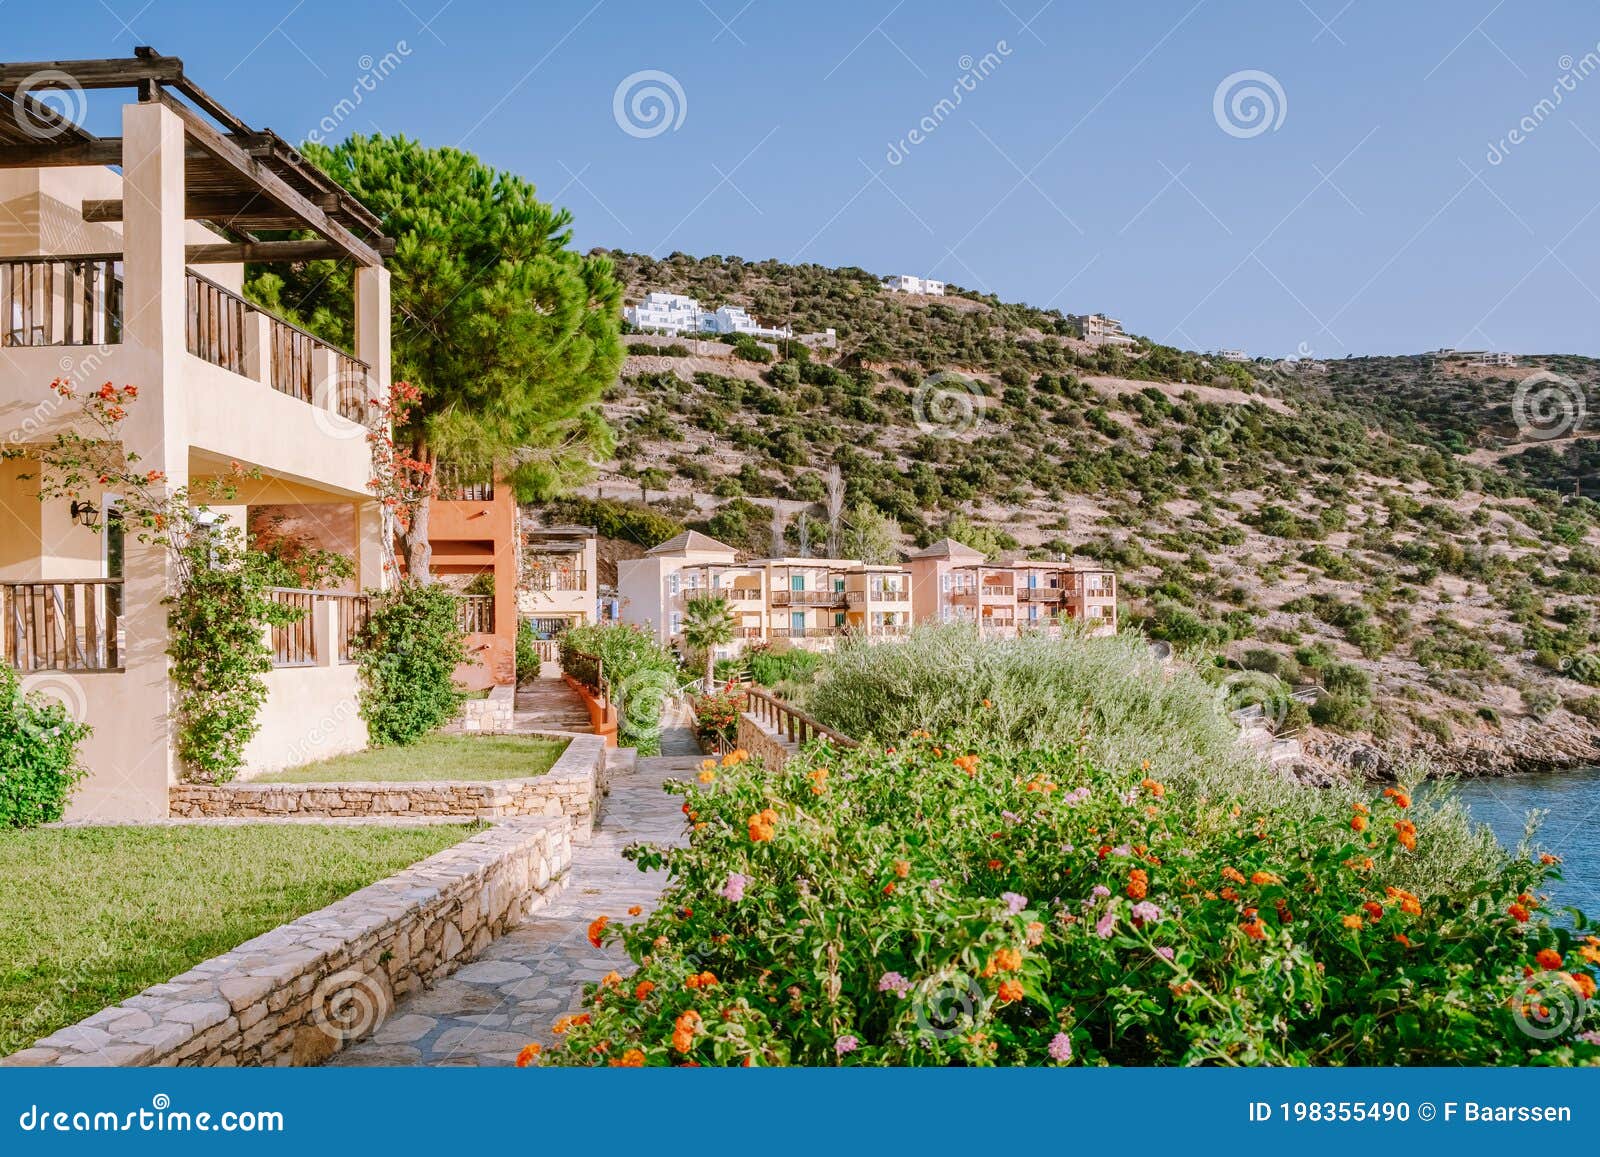 Crete Greece, Candia Park a Luxury Holiday Village in Crete Greece Stock Photo - Image of building, relaxation: 198355490